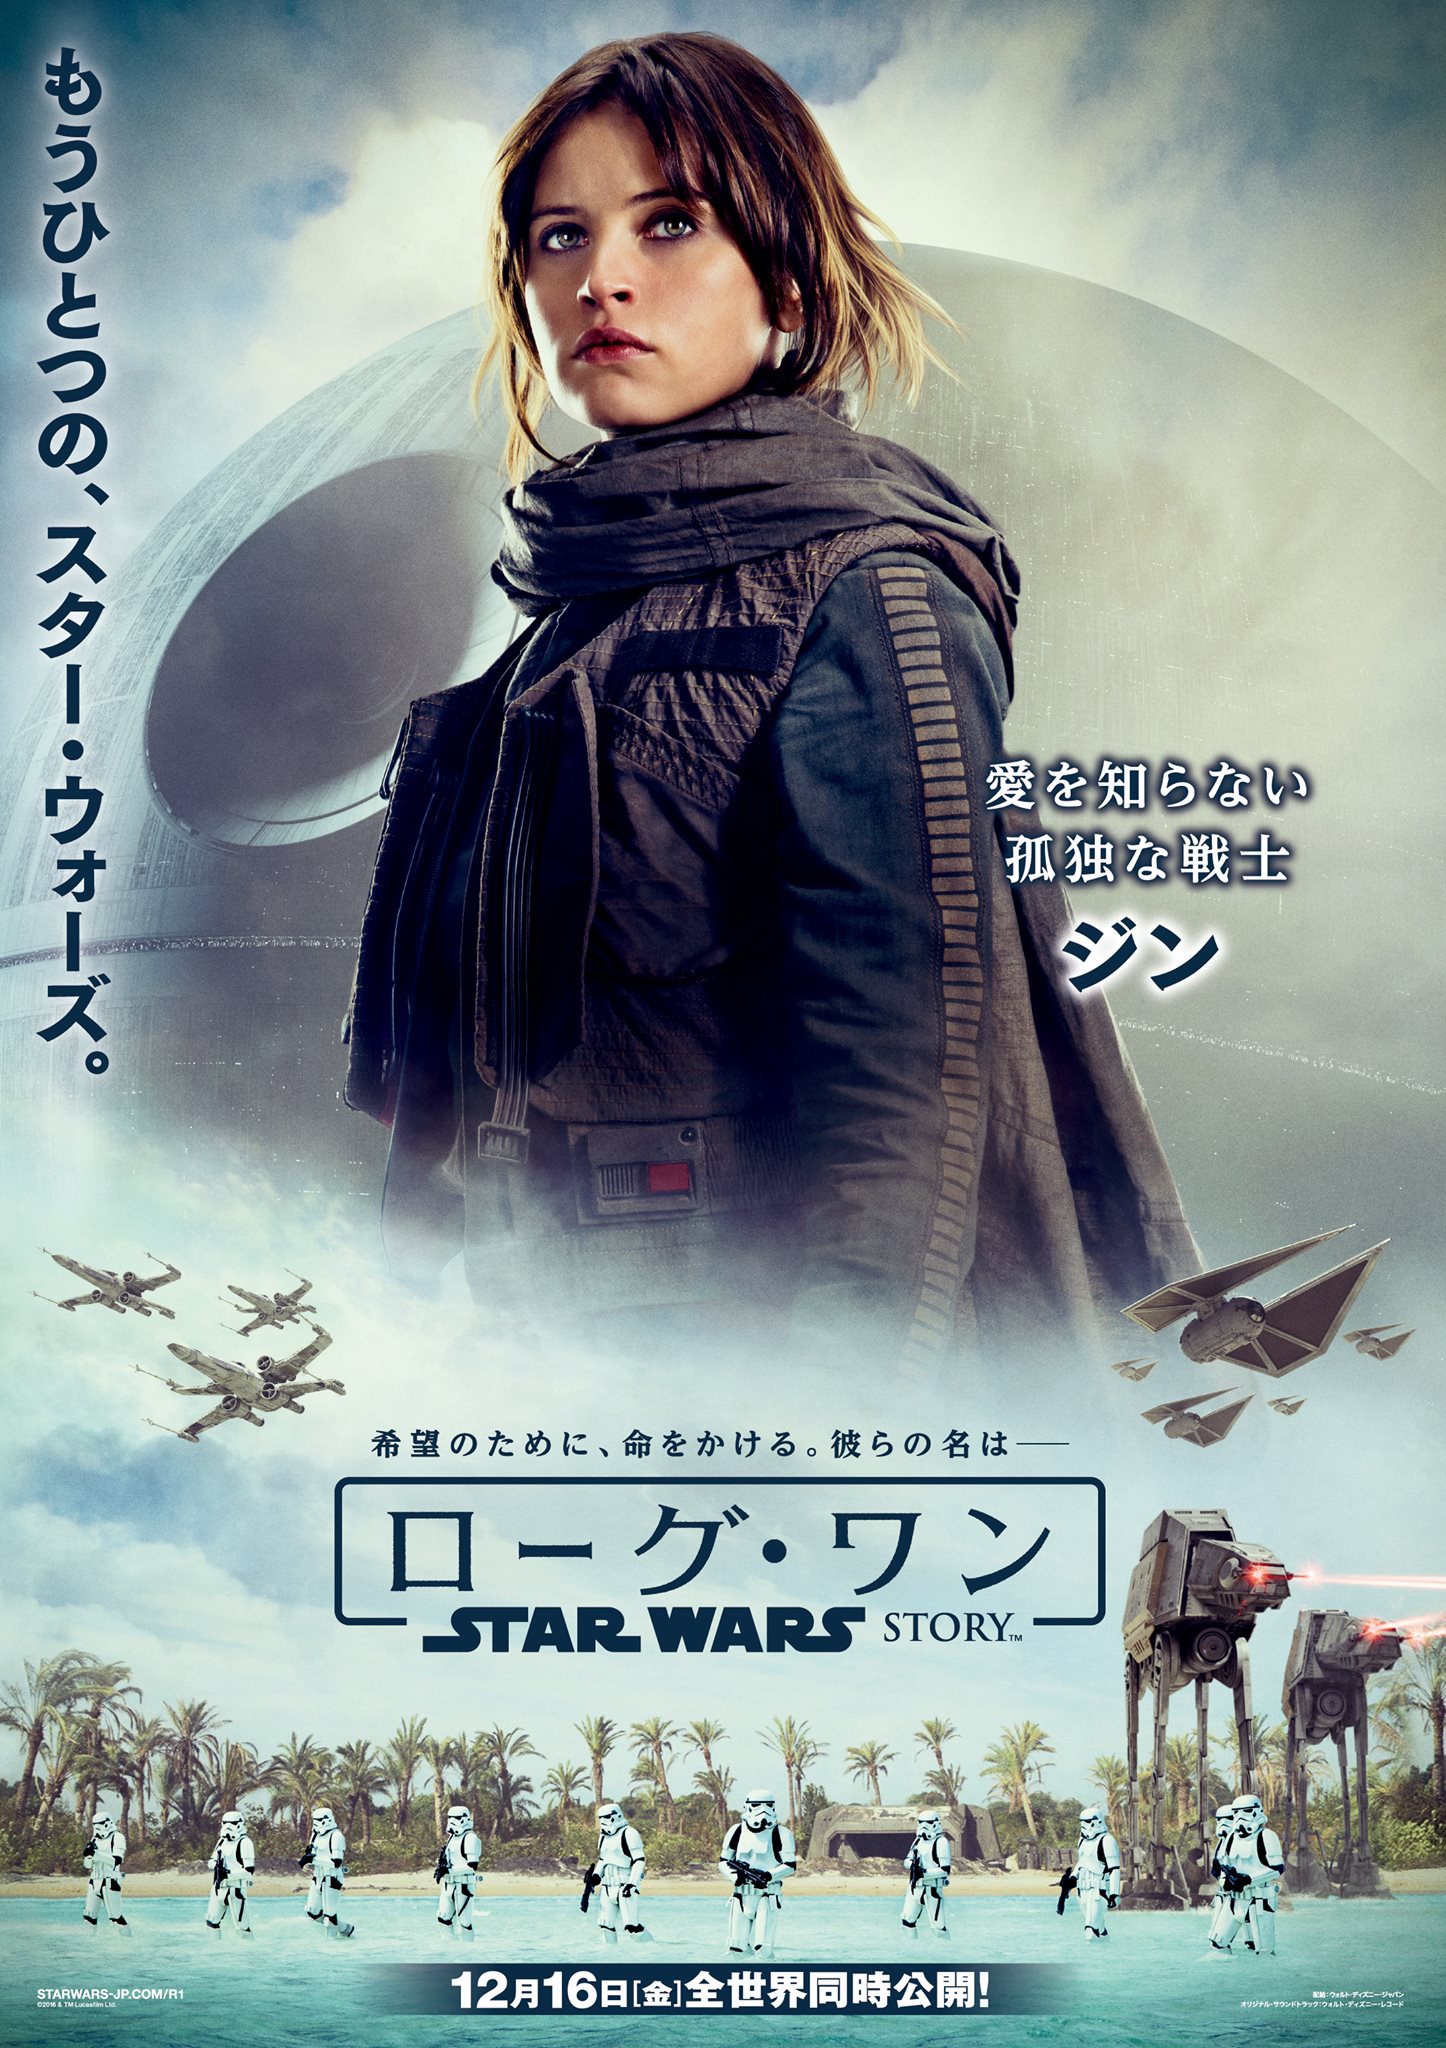 Mega Sized Movie Poster Image for Rogue One: A Star Wars Story (#20 of 47)